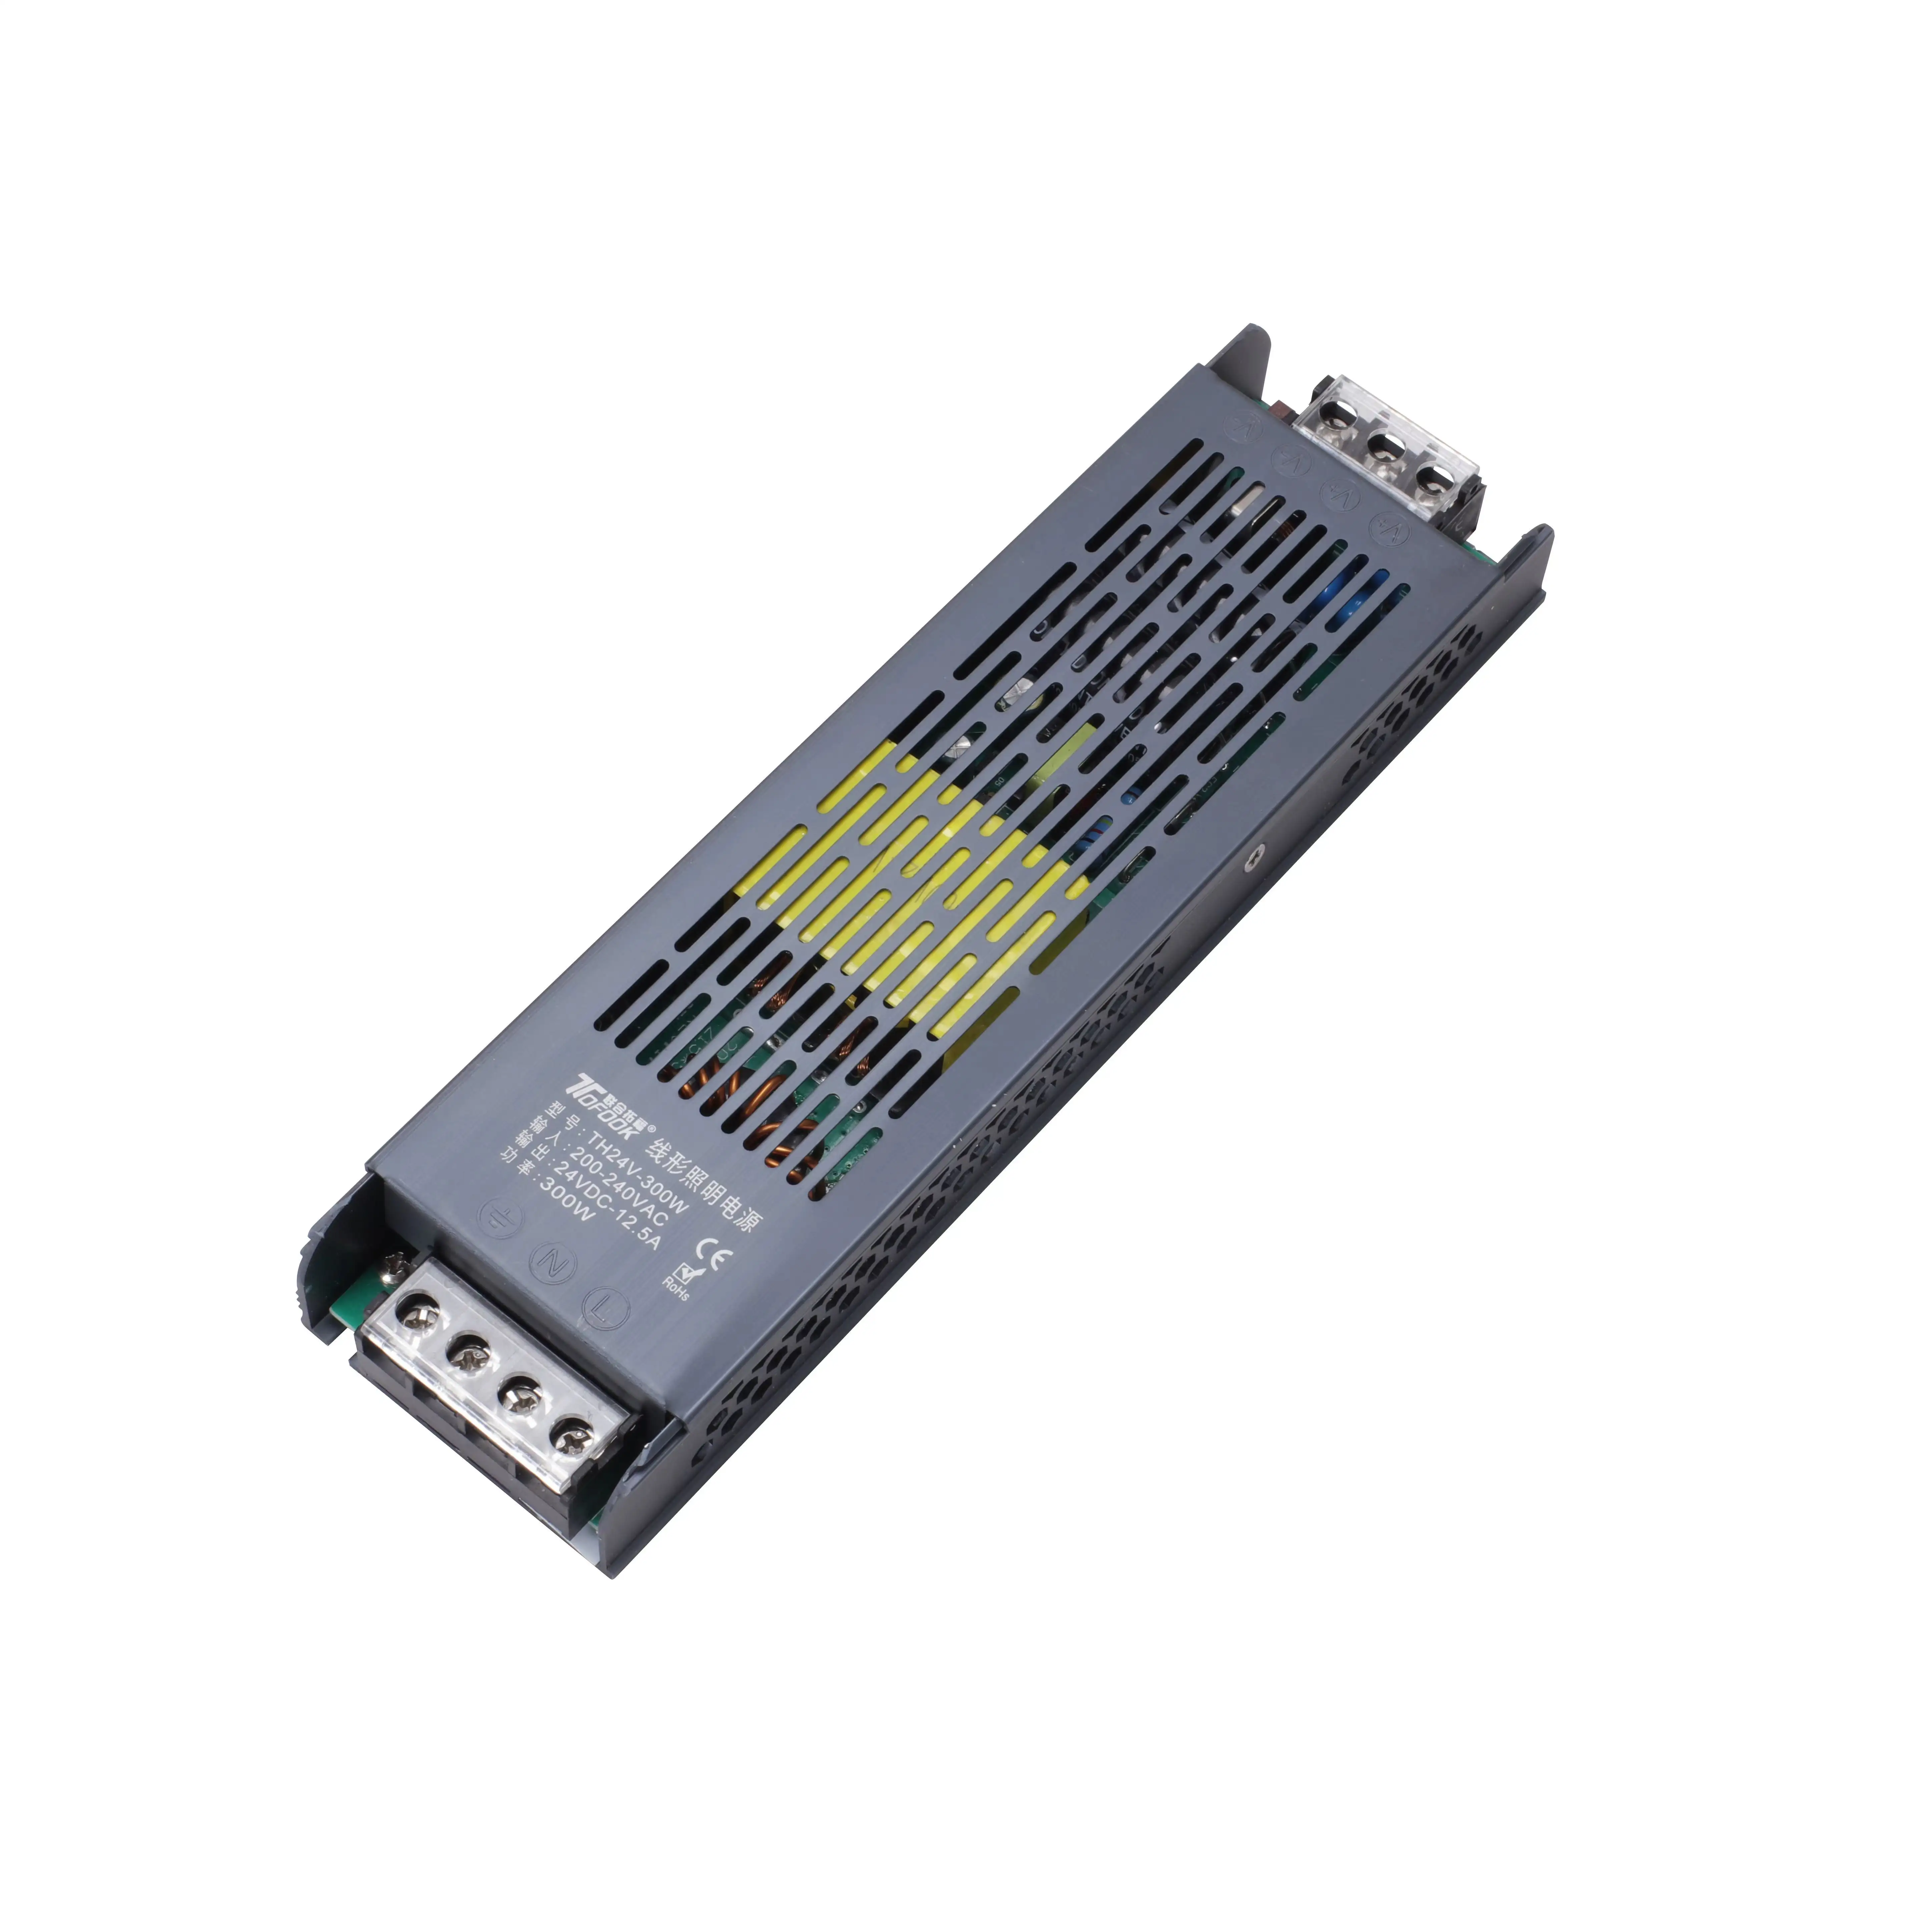 IP65 Waterproof 24V Power Supply for LED Strip Lights CCTV Computer Project LED Display